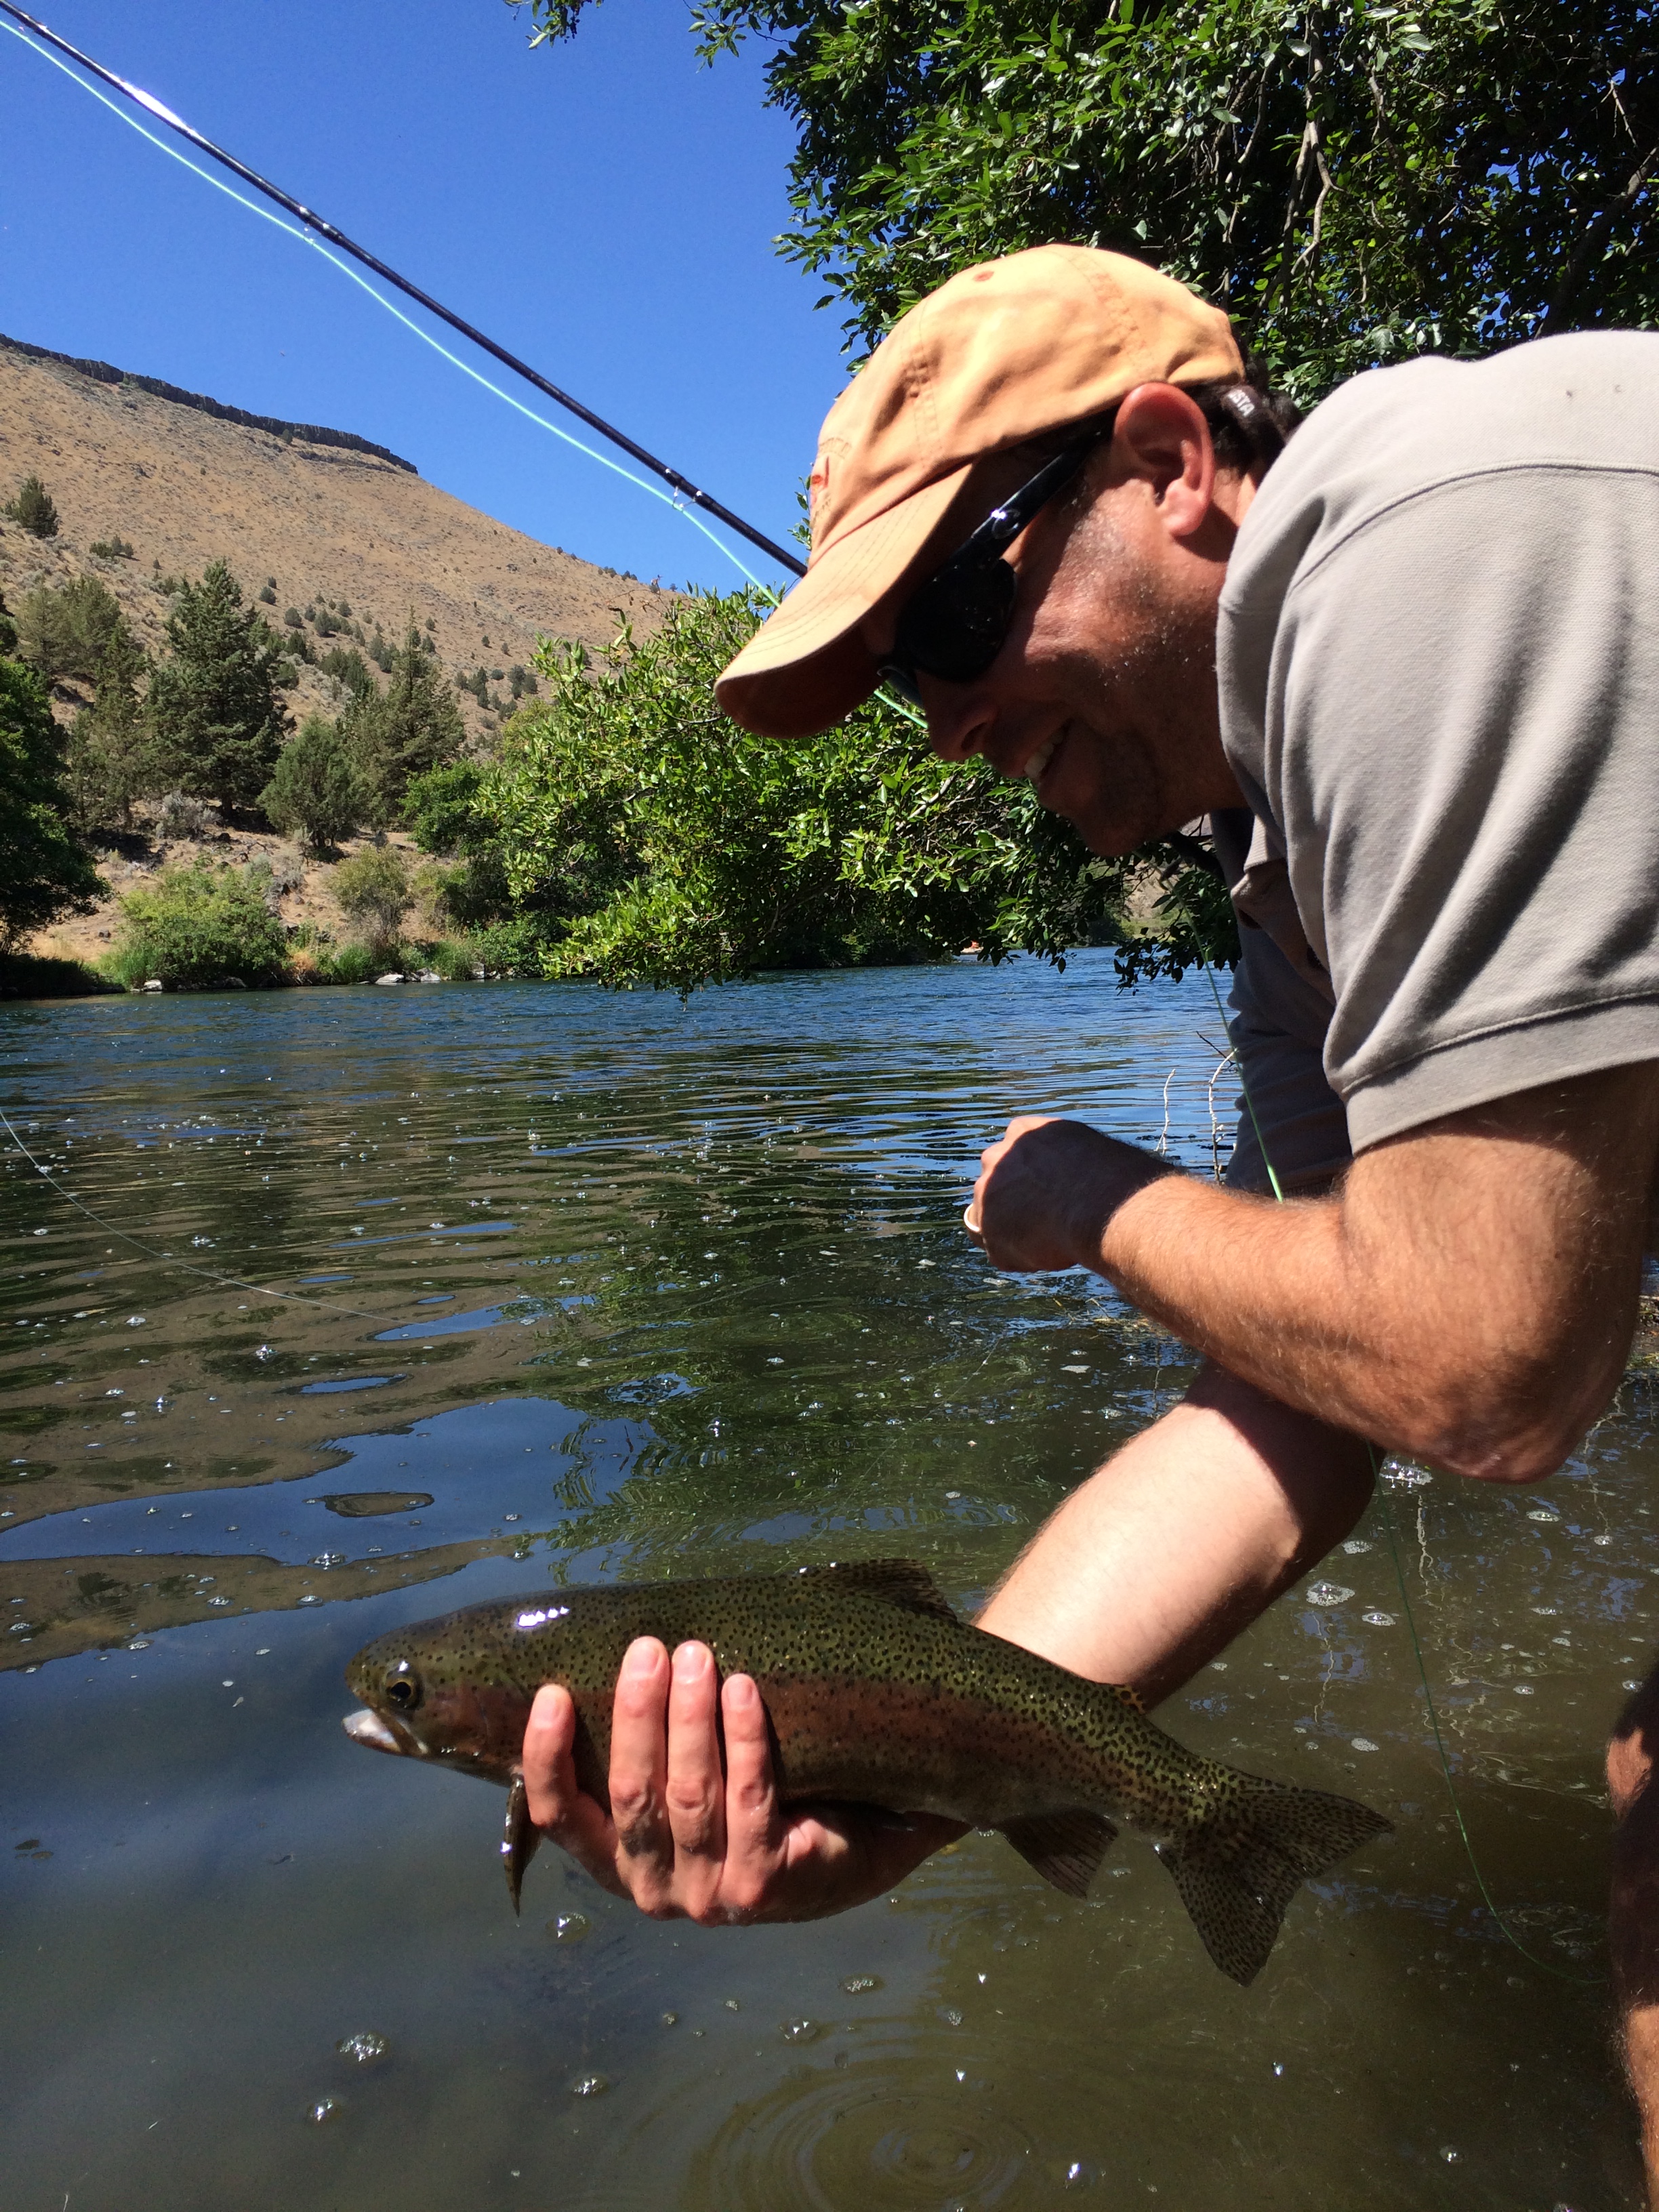  Andy Daters lifts one of many trout we spotted rising on a hot July day. 